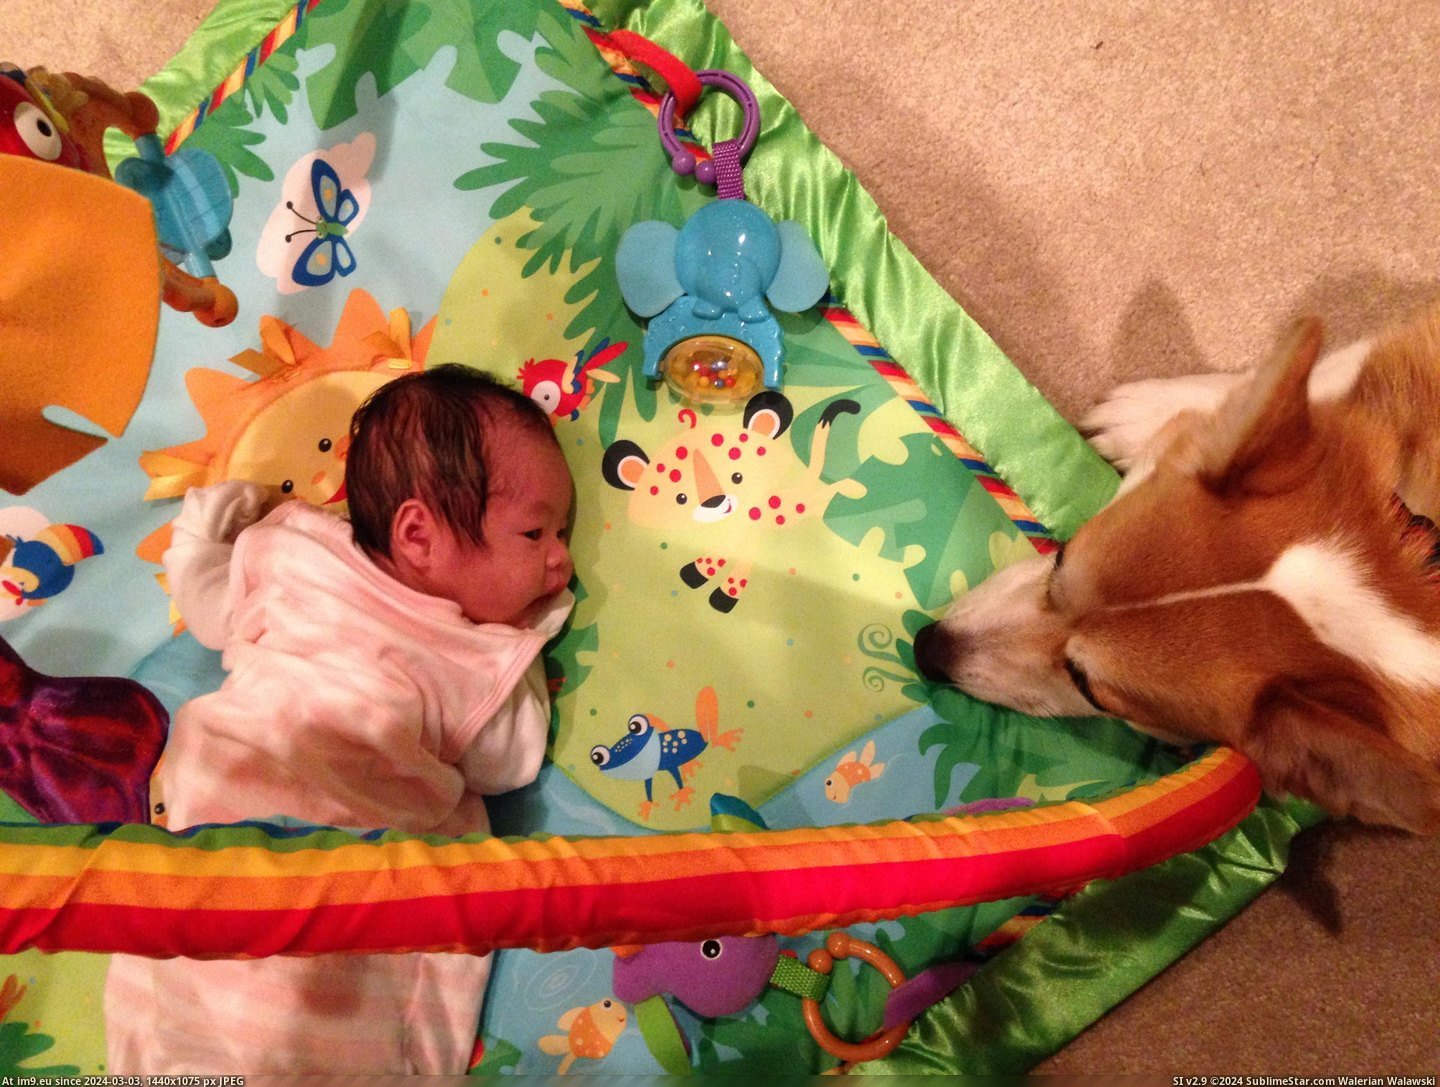 #Was #New #Ago #But #How #Daughter #Weeks #Born [Aww] My daughter was born three weeks ago. I worried about how my corgi would react but he's treating her like his new BFF... 2 Pic. (Image of album My r/AWW favs))